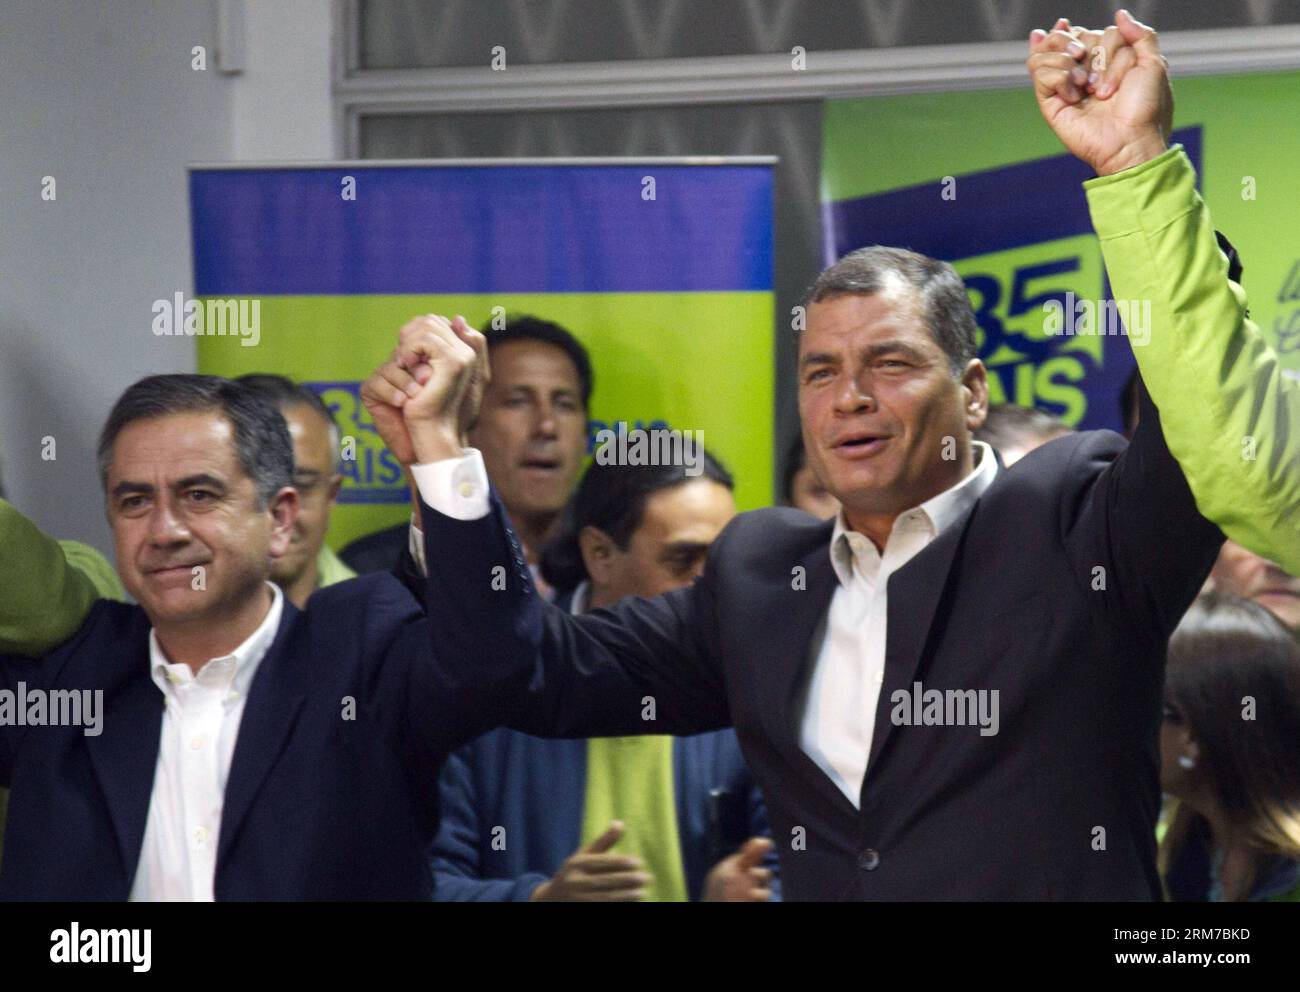 Ecuador s President Rafael Correa (R) and the candidate for the reelection to the Quito s Mayoralty, Augusto Barrera (L), react after receiving the results of the provincial and municipal election, at the headquarters of the Pais Alliance party, in the city of Quito, capital of Ecuador, on Feb. 23, 2014. The opposition candidate Mauricio Rodas won the election for the Quito s Mayoralty, according to local press. (Xinhua/Santiago Armas) (fnc) (ah) ECUADOR-QUITO-POLITICS-ELECTION PUBLICATIONxNOTxINxCHN   Ecuador S President Rafael Correa r and The Candidate for The REELECTION to The Quito S mayo Stock Photo